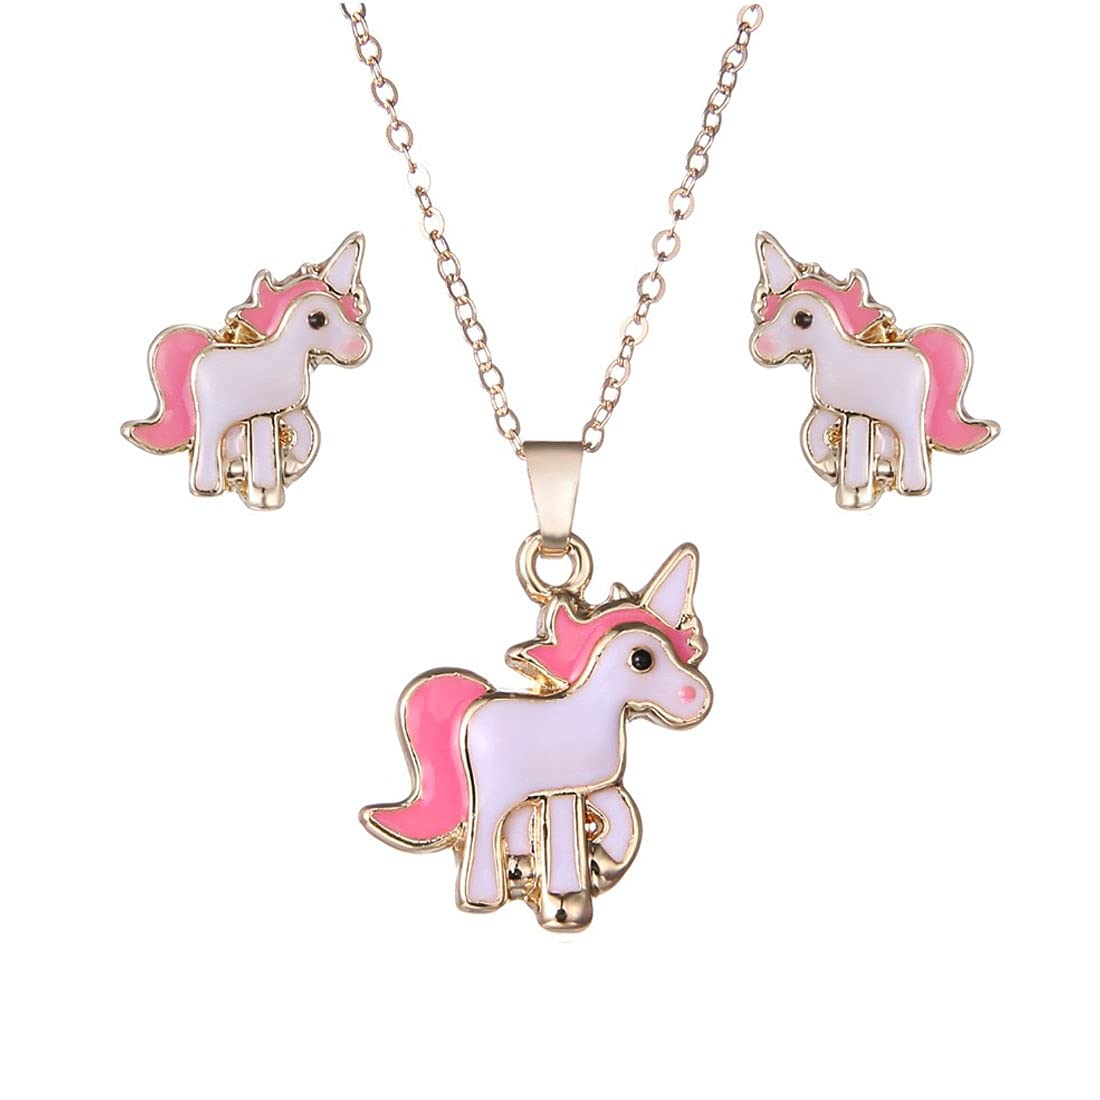 Melbees by Yellow Chimes Pendant Set for Girls Lovely Pink Baby Unicorn Small Pendant Set Necklace with Stud Earrings Kids Jewellery Set for Girls and Kids.